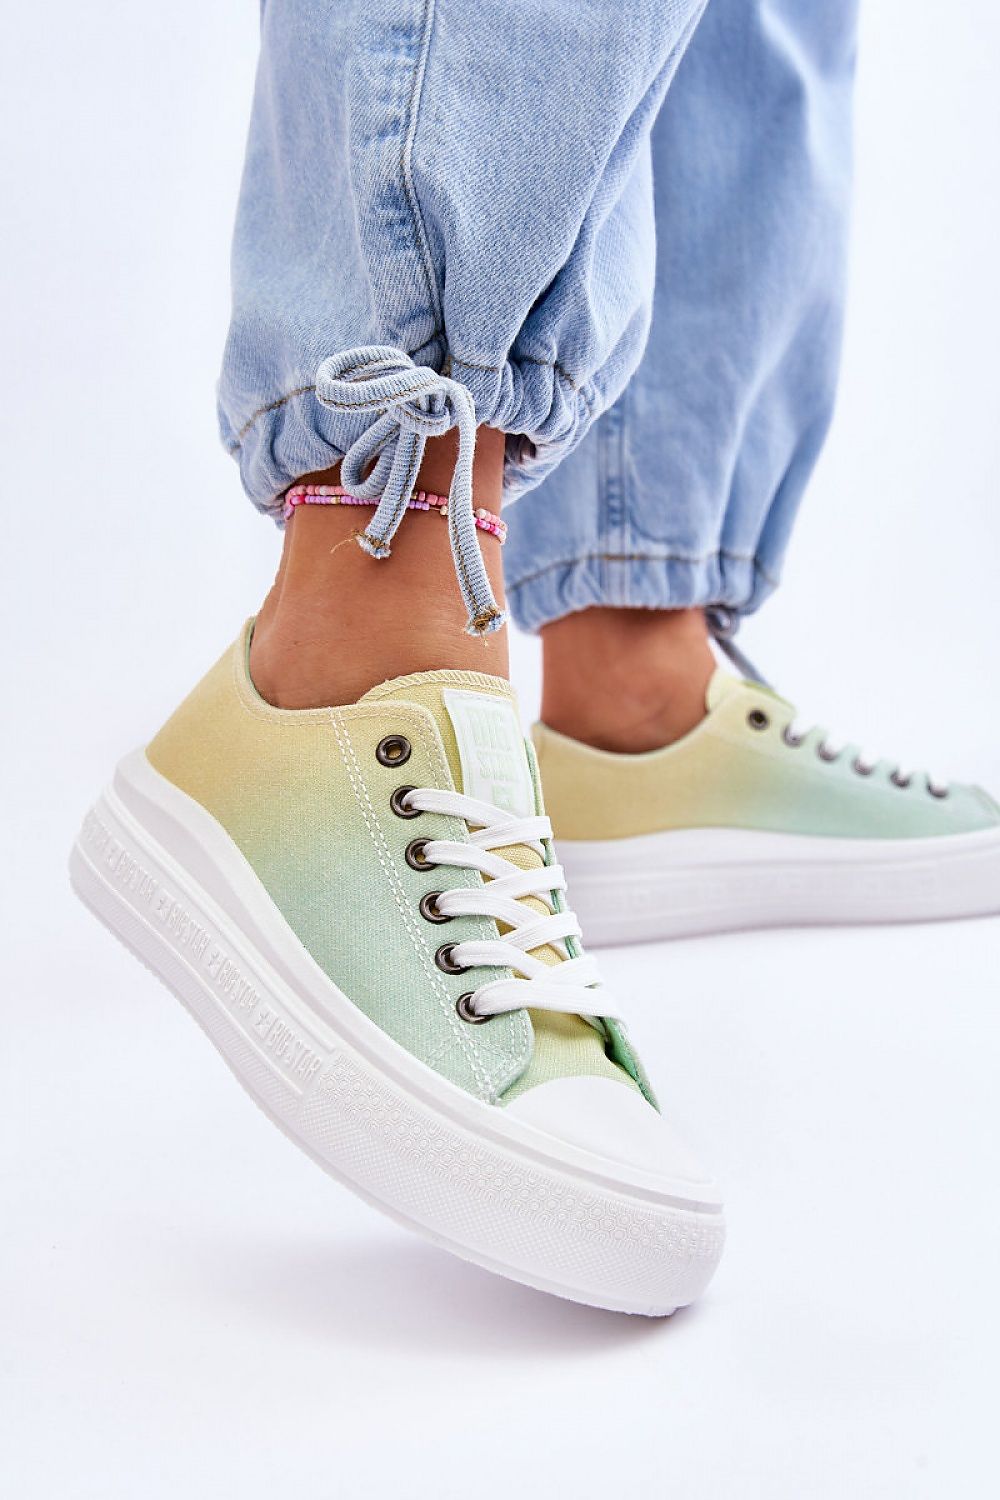 TEEK - Yellow Green Ombre Laced Platform Sneakers SHOES TEEK MH 6  